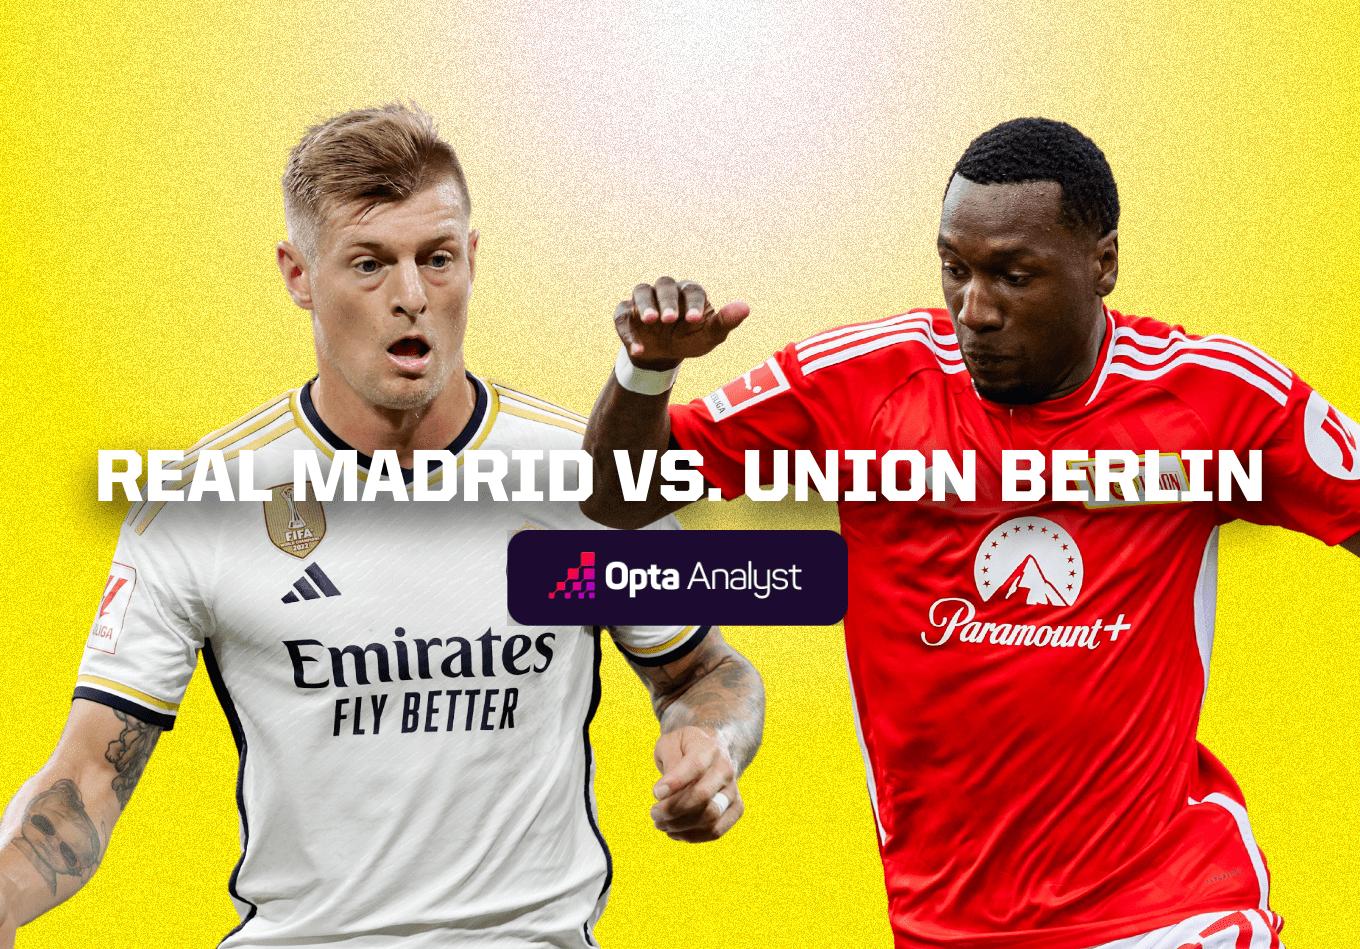 Real Madrid vs Union Berlin: Prediction and Preview